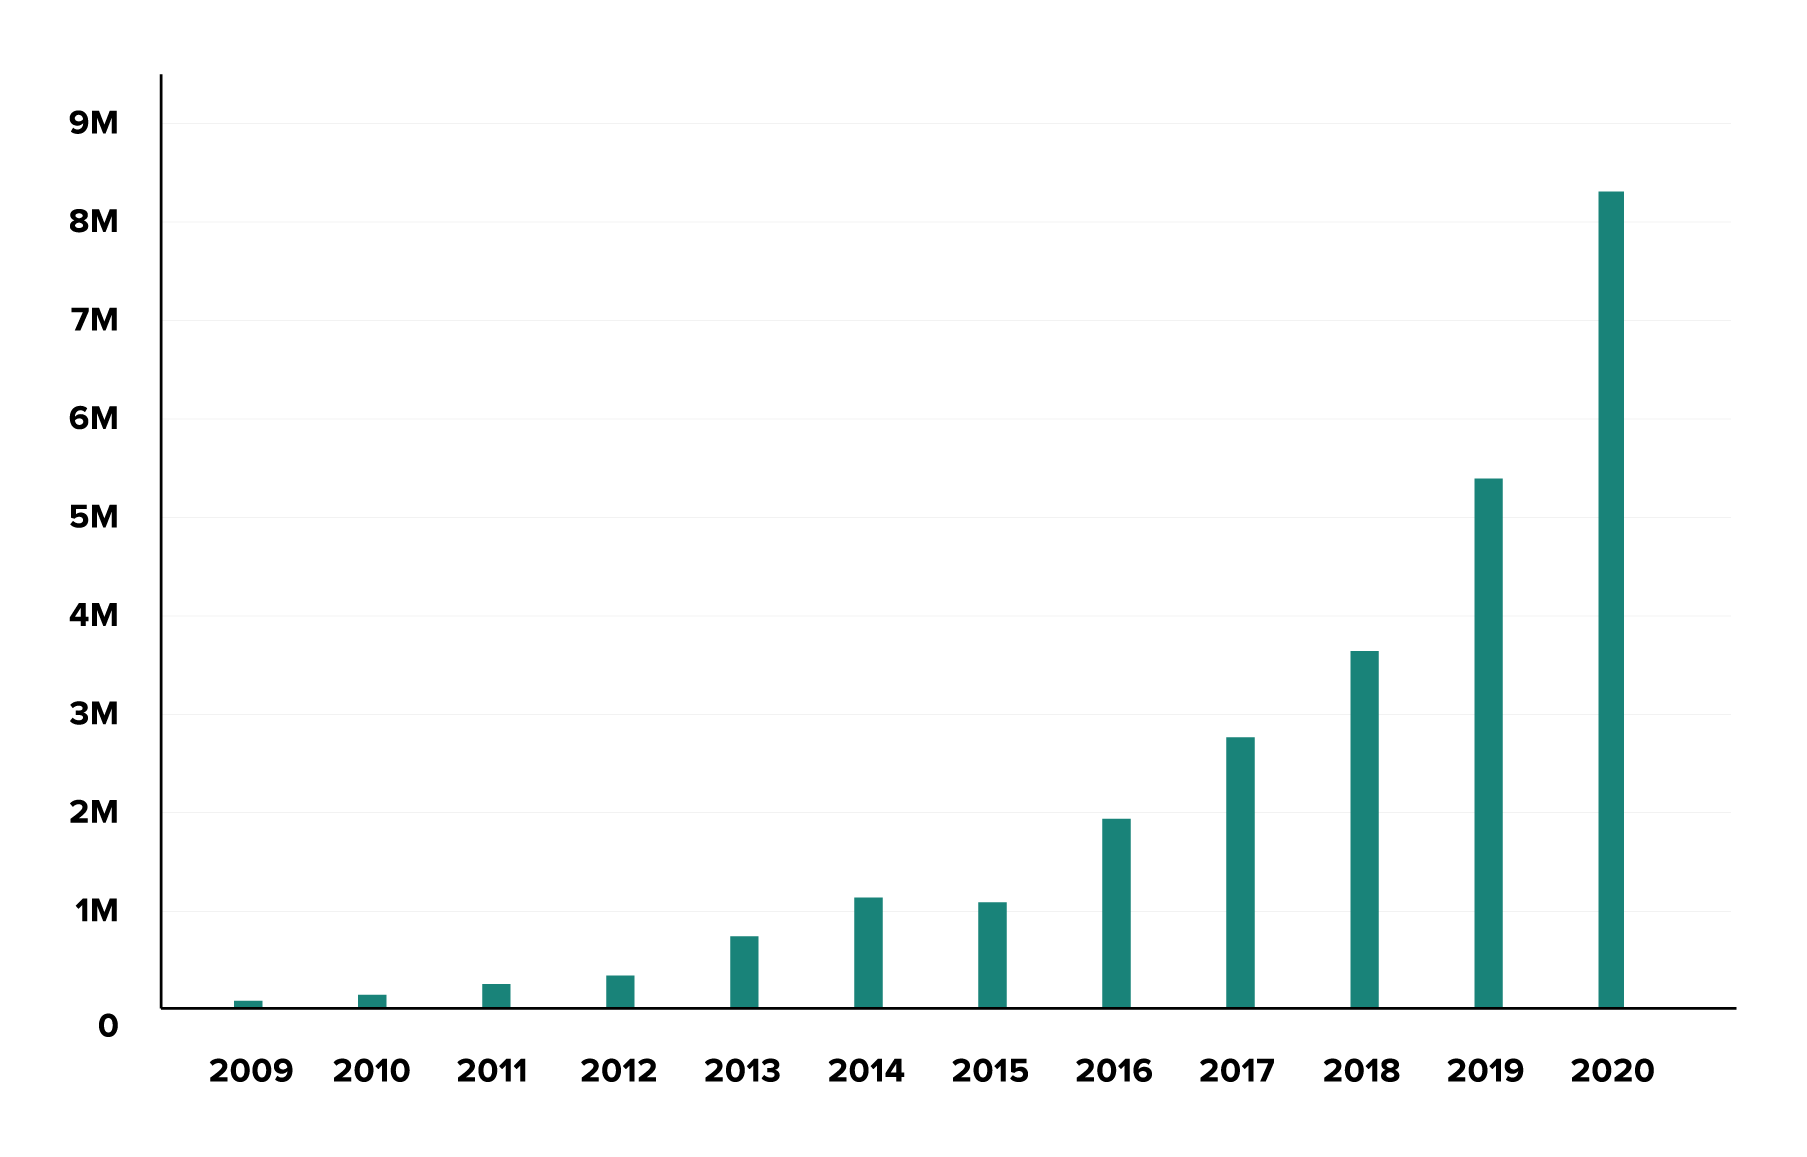 Graph of Igloo Vision's exponential revenue growth from 2009 - 2020